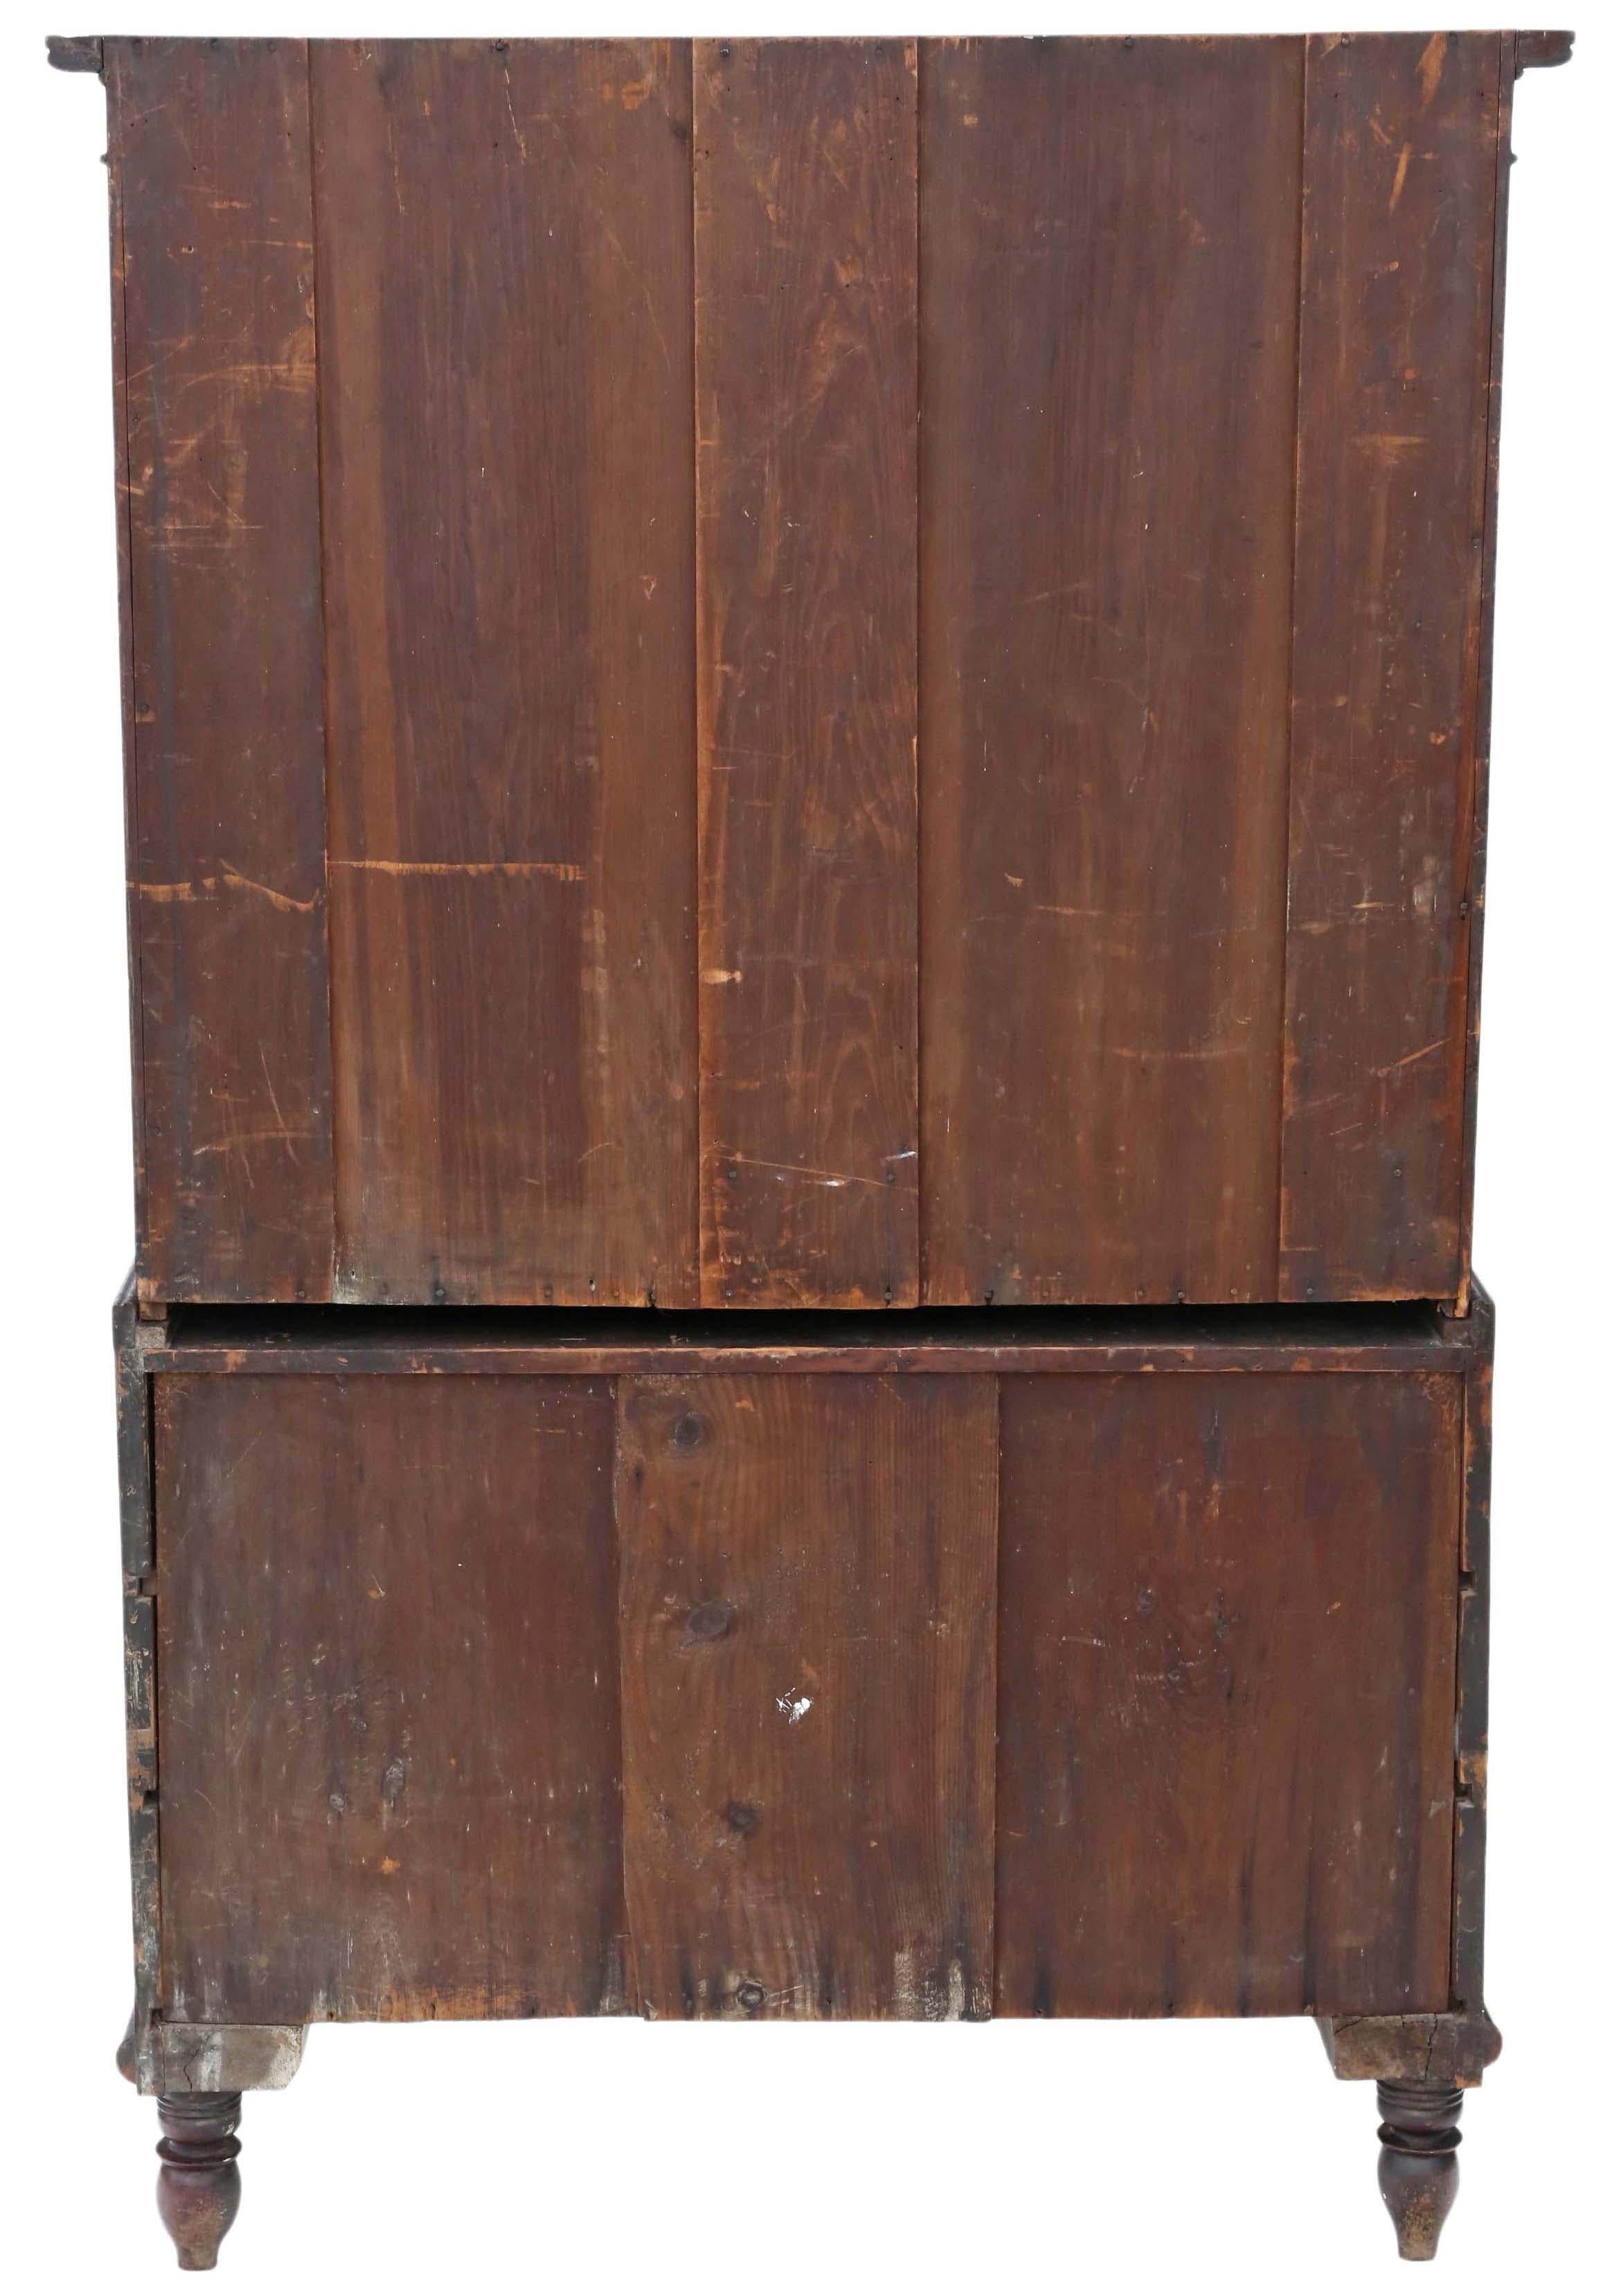 Antique High-Quality Mahogany Housekeeper's Cupboard with Secretaire, circa 1800 For Sale 3